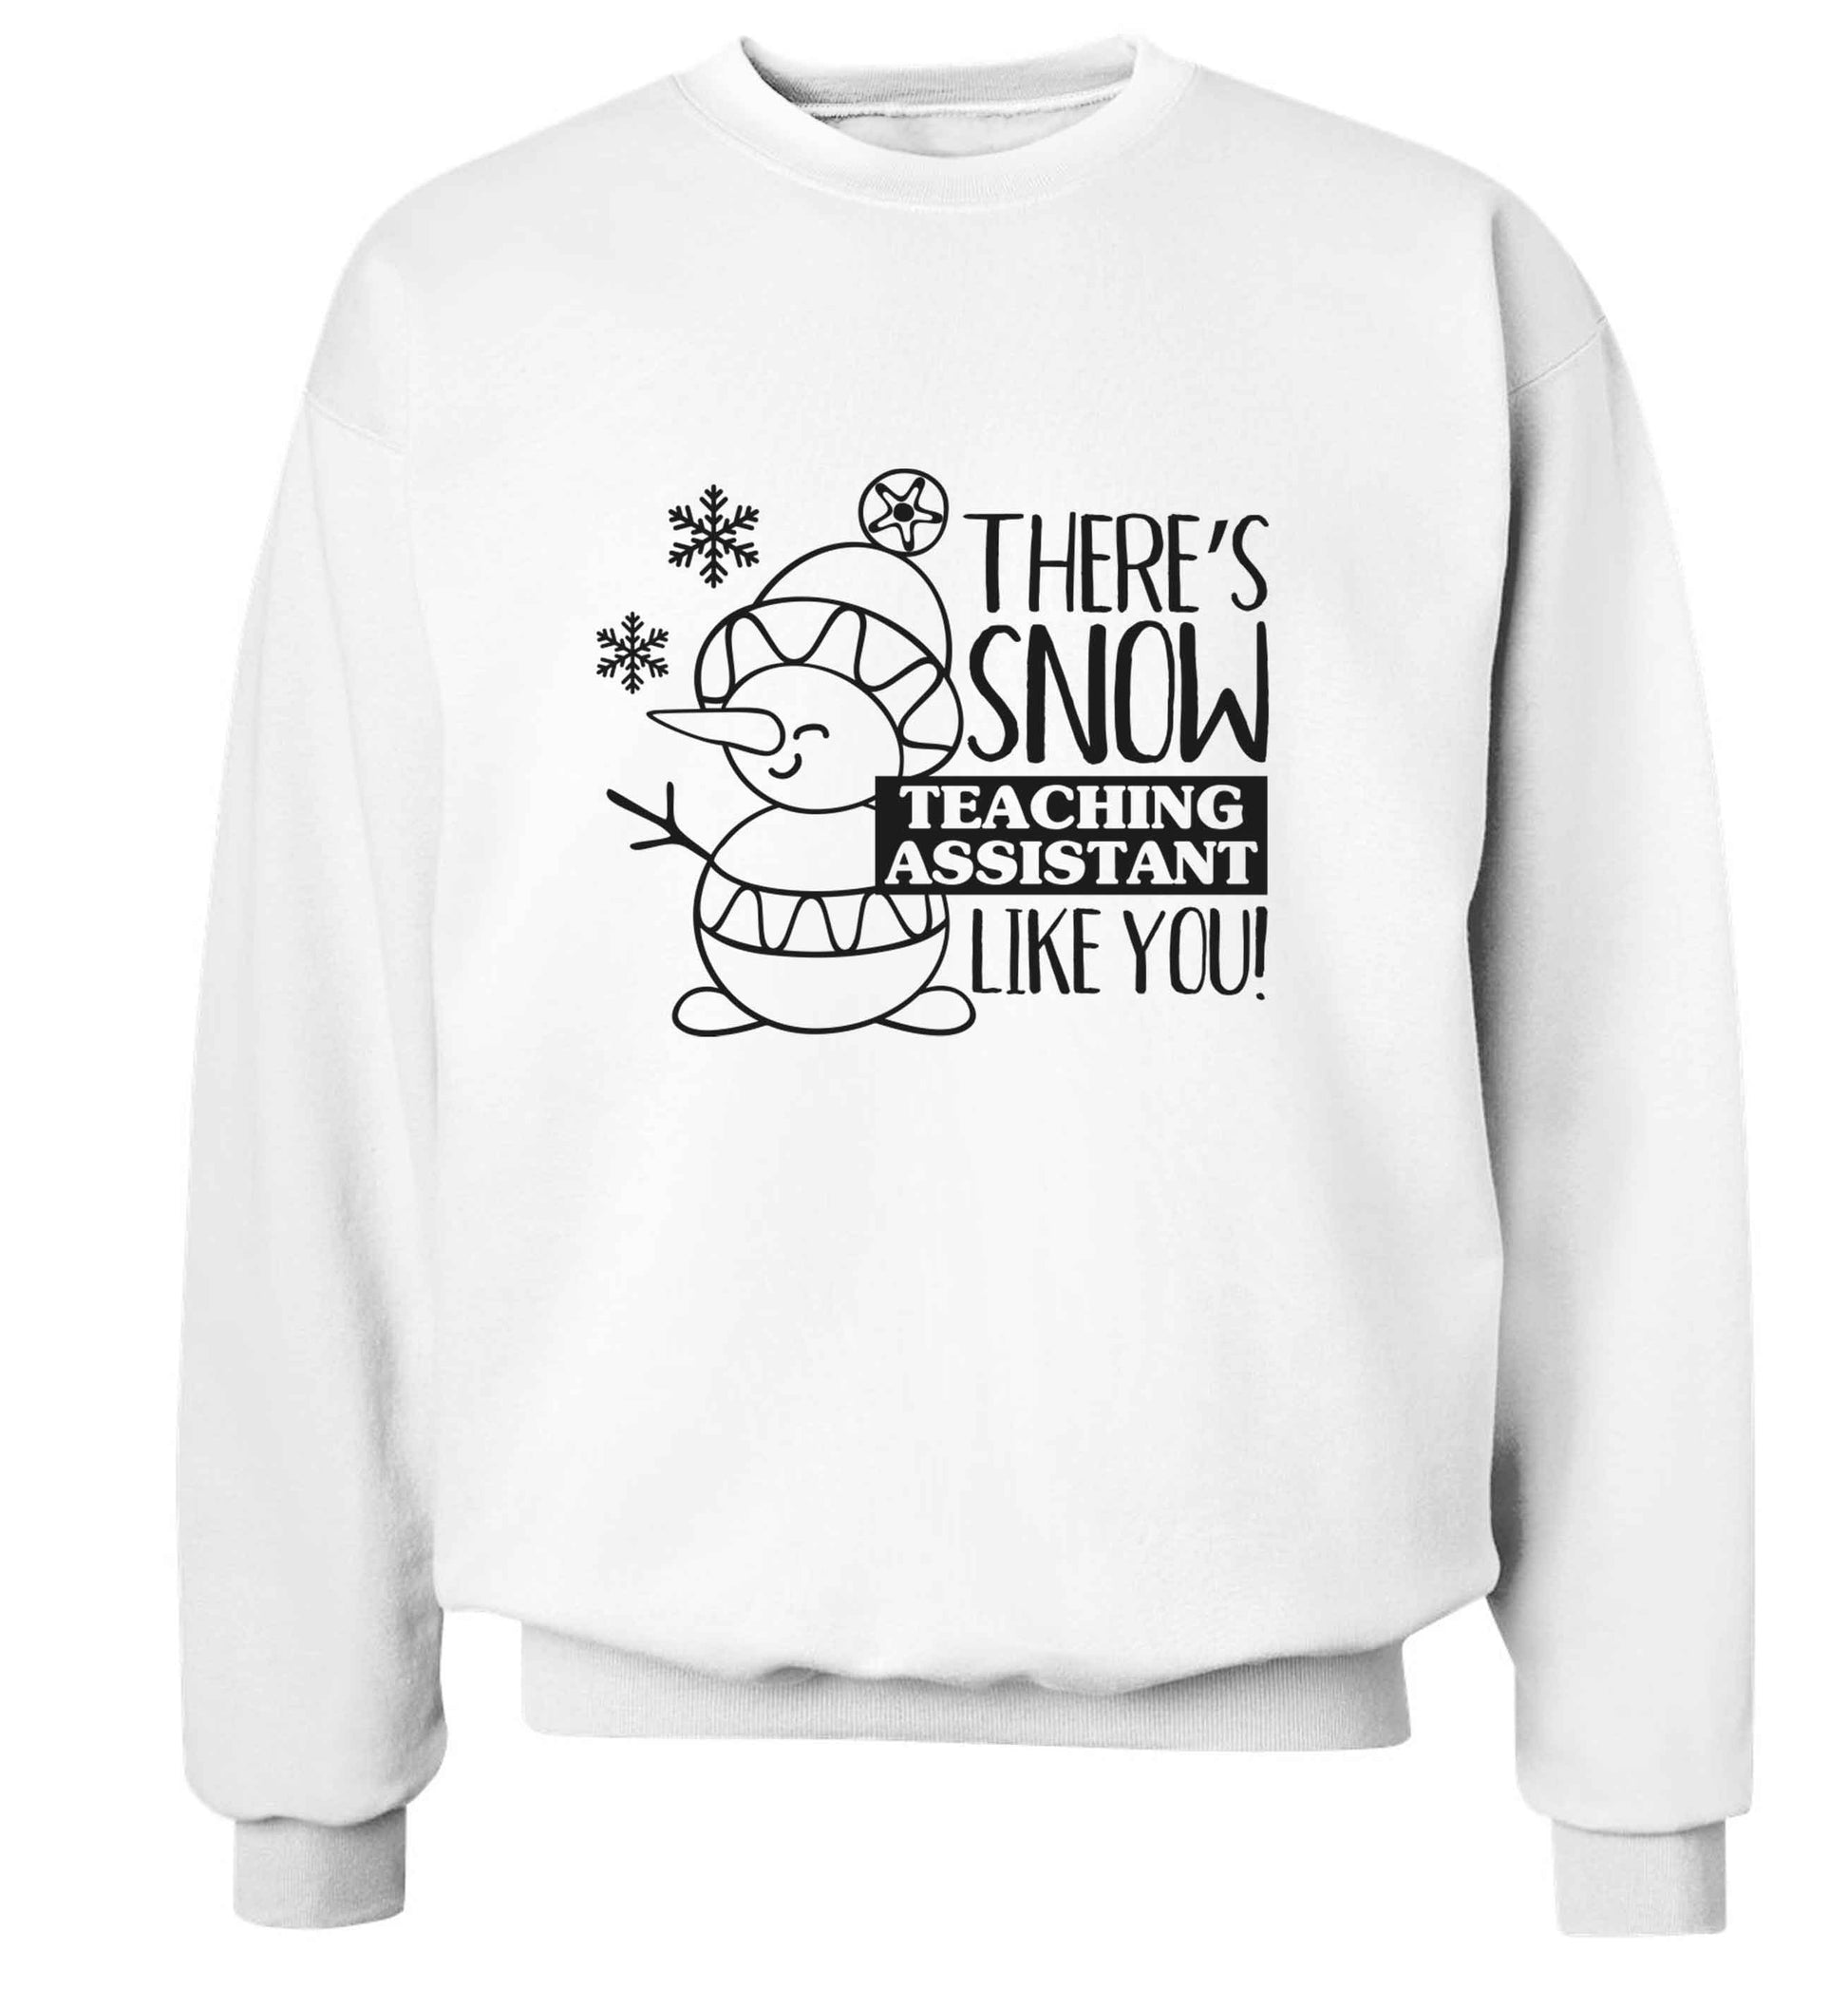 There's snow teaching assistant like you adult's unisex white sweater 2XL